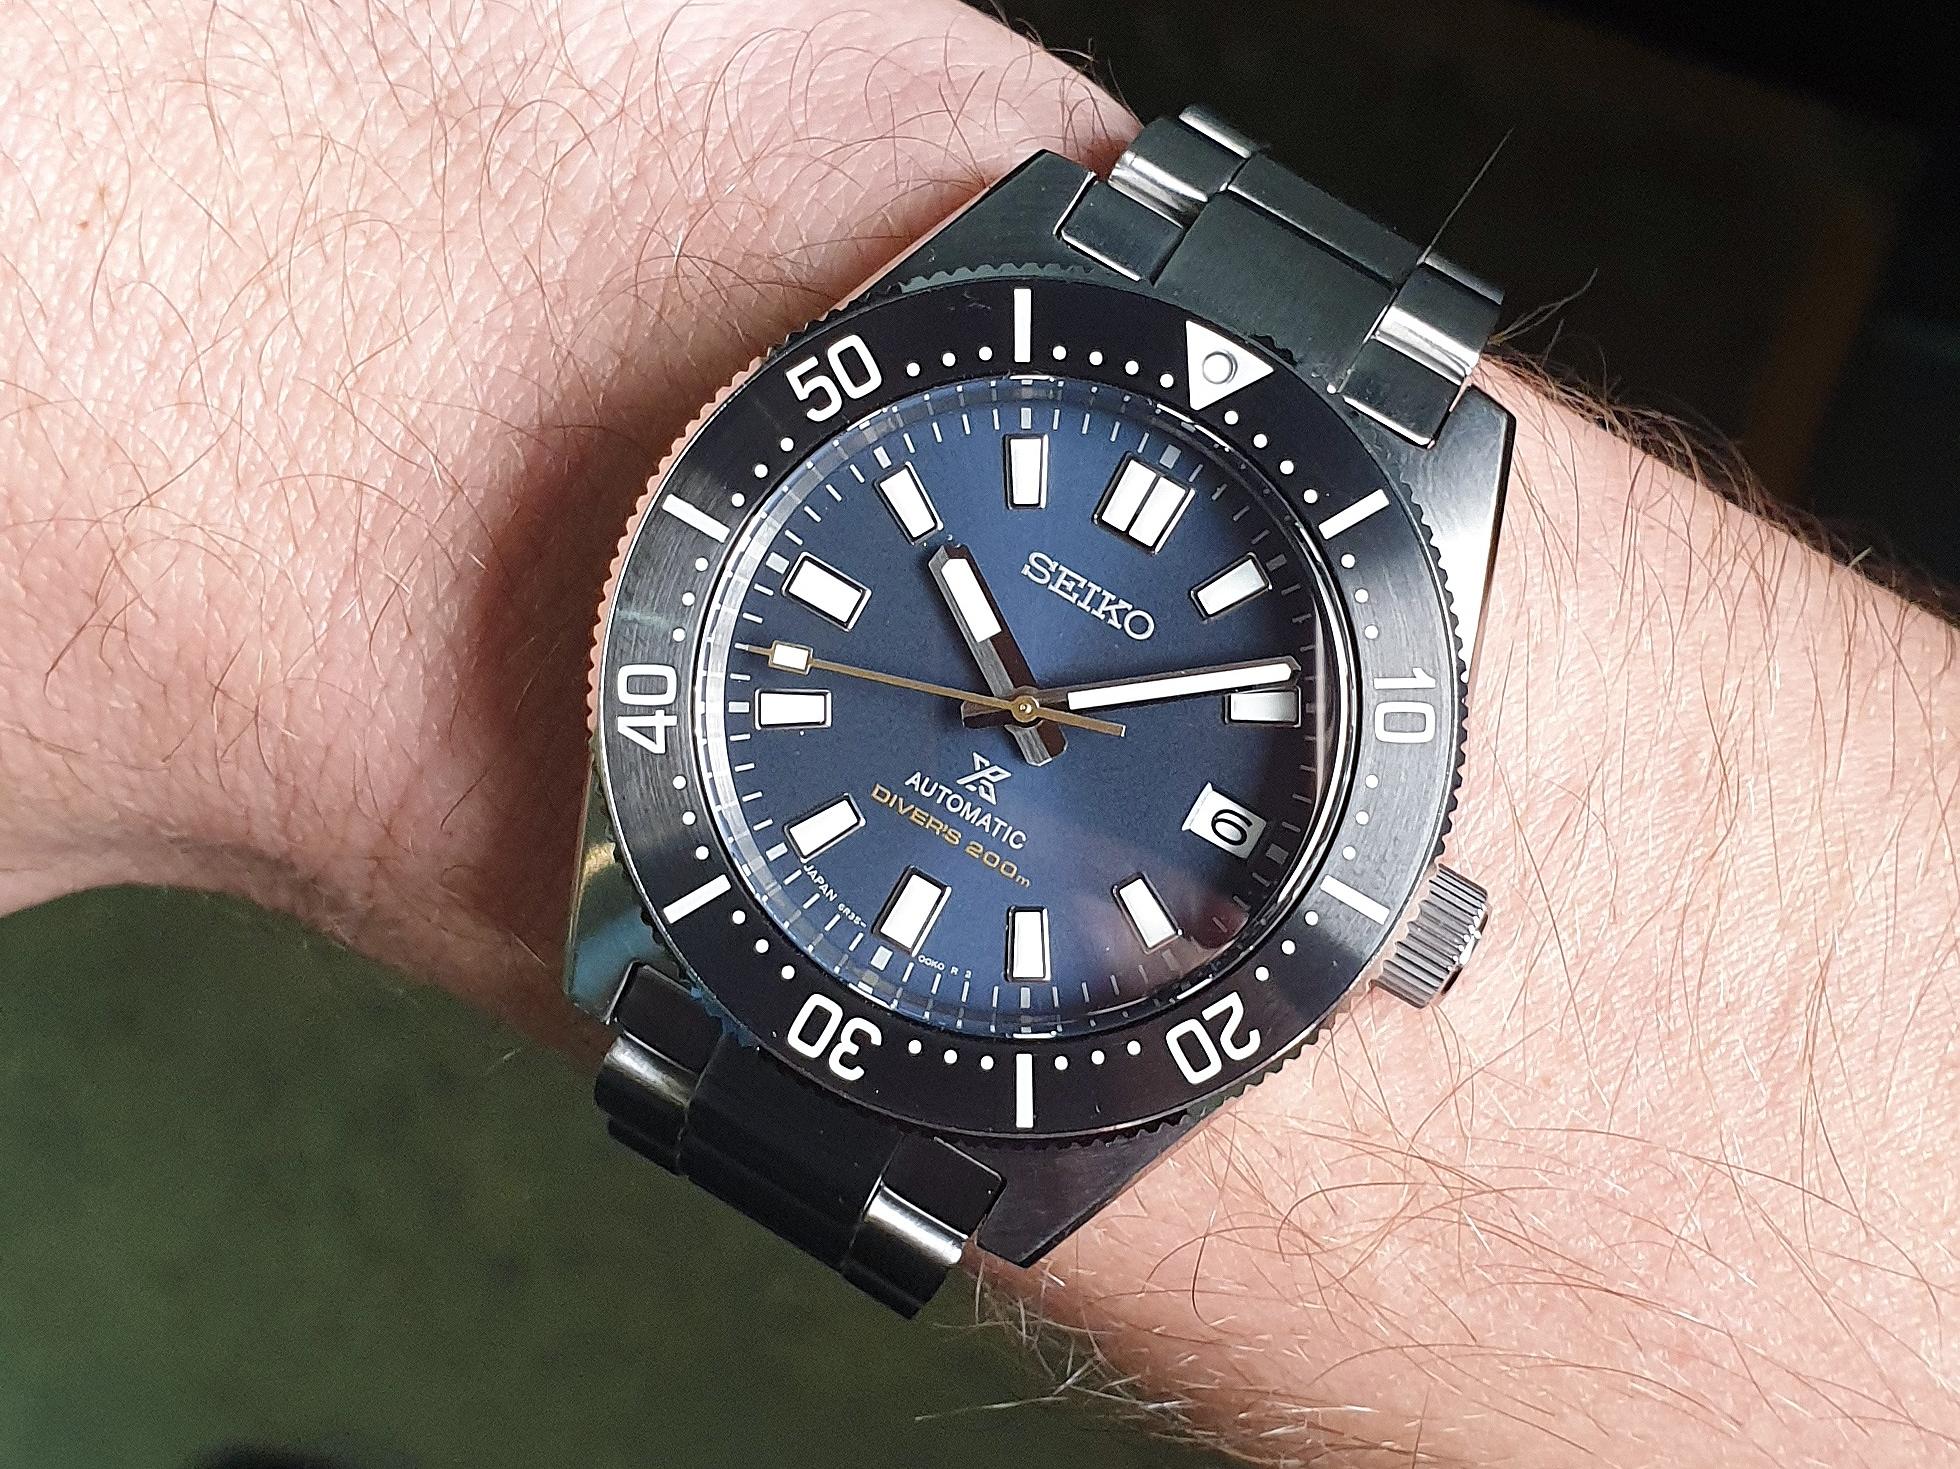 Seiko SPB149j best affordable dive watch review 2020